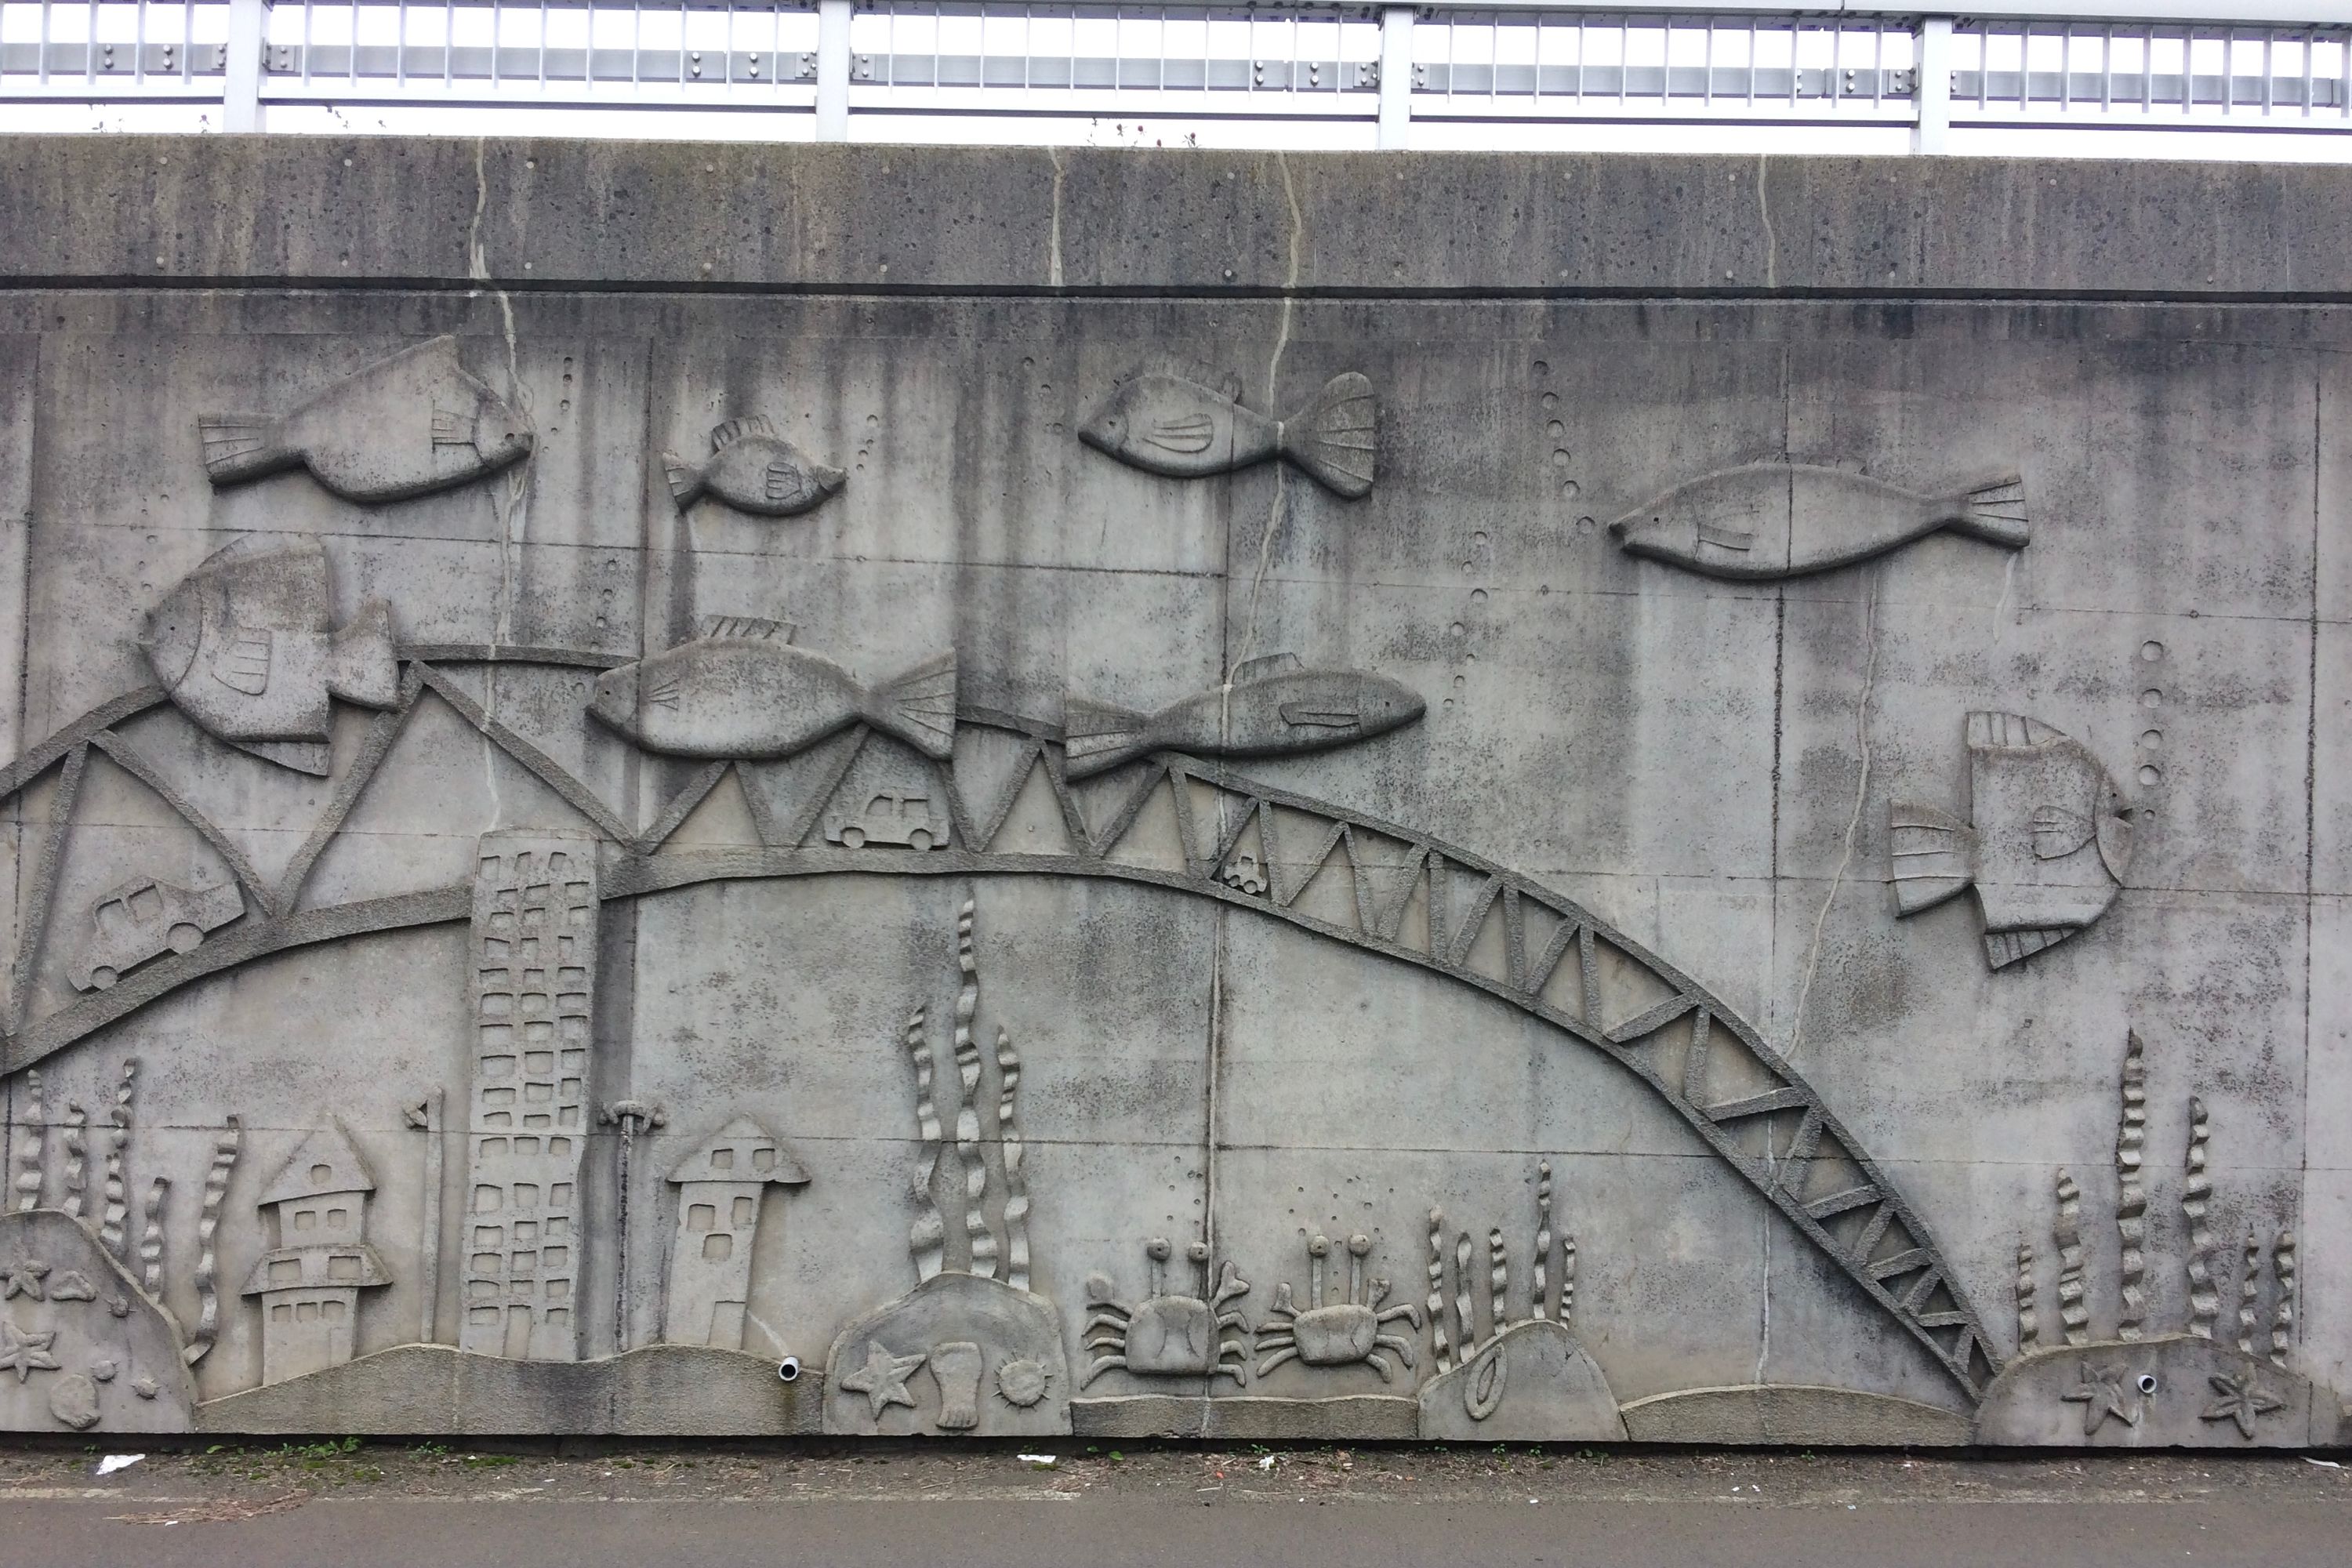 A concrete relief of an underwater scene on an overpass.